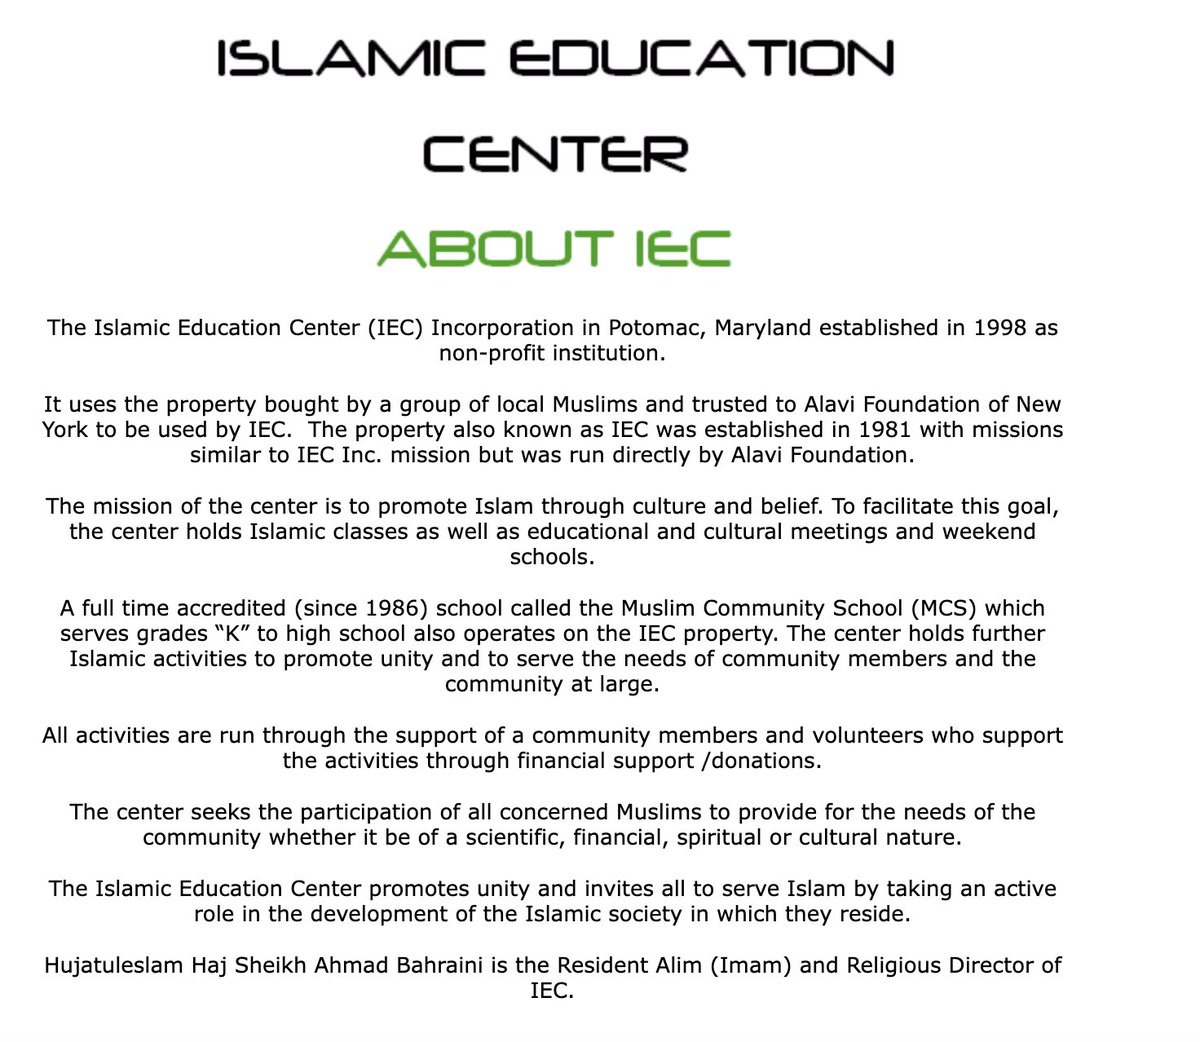 The Islamic Education Center in Maryland has links to the Alavi Foundation which is controlled by the Mostazafan Foundation in #Iran that is sanctioned under Executive Order 13876.